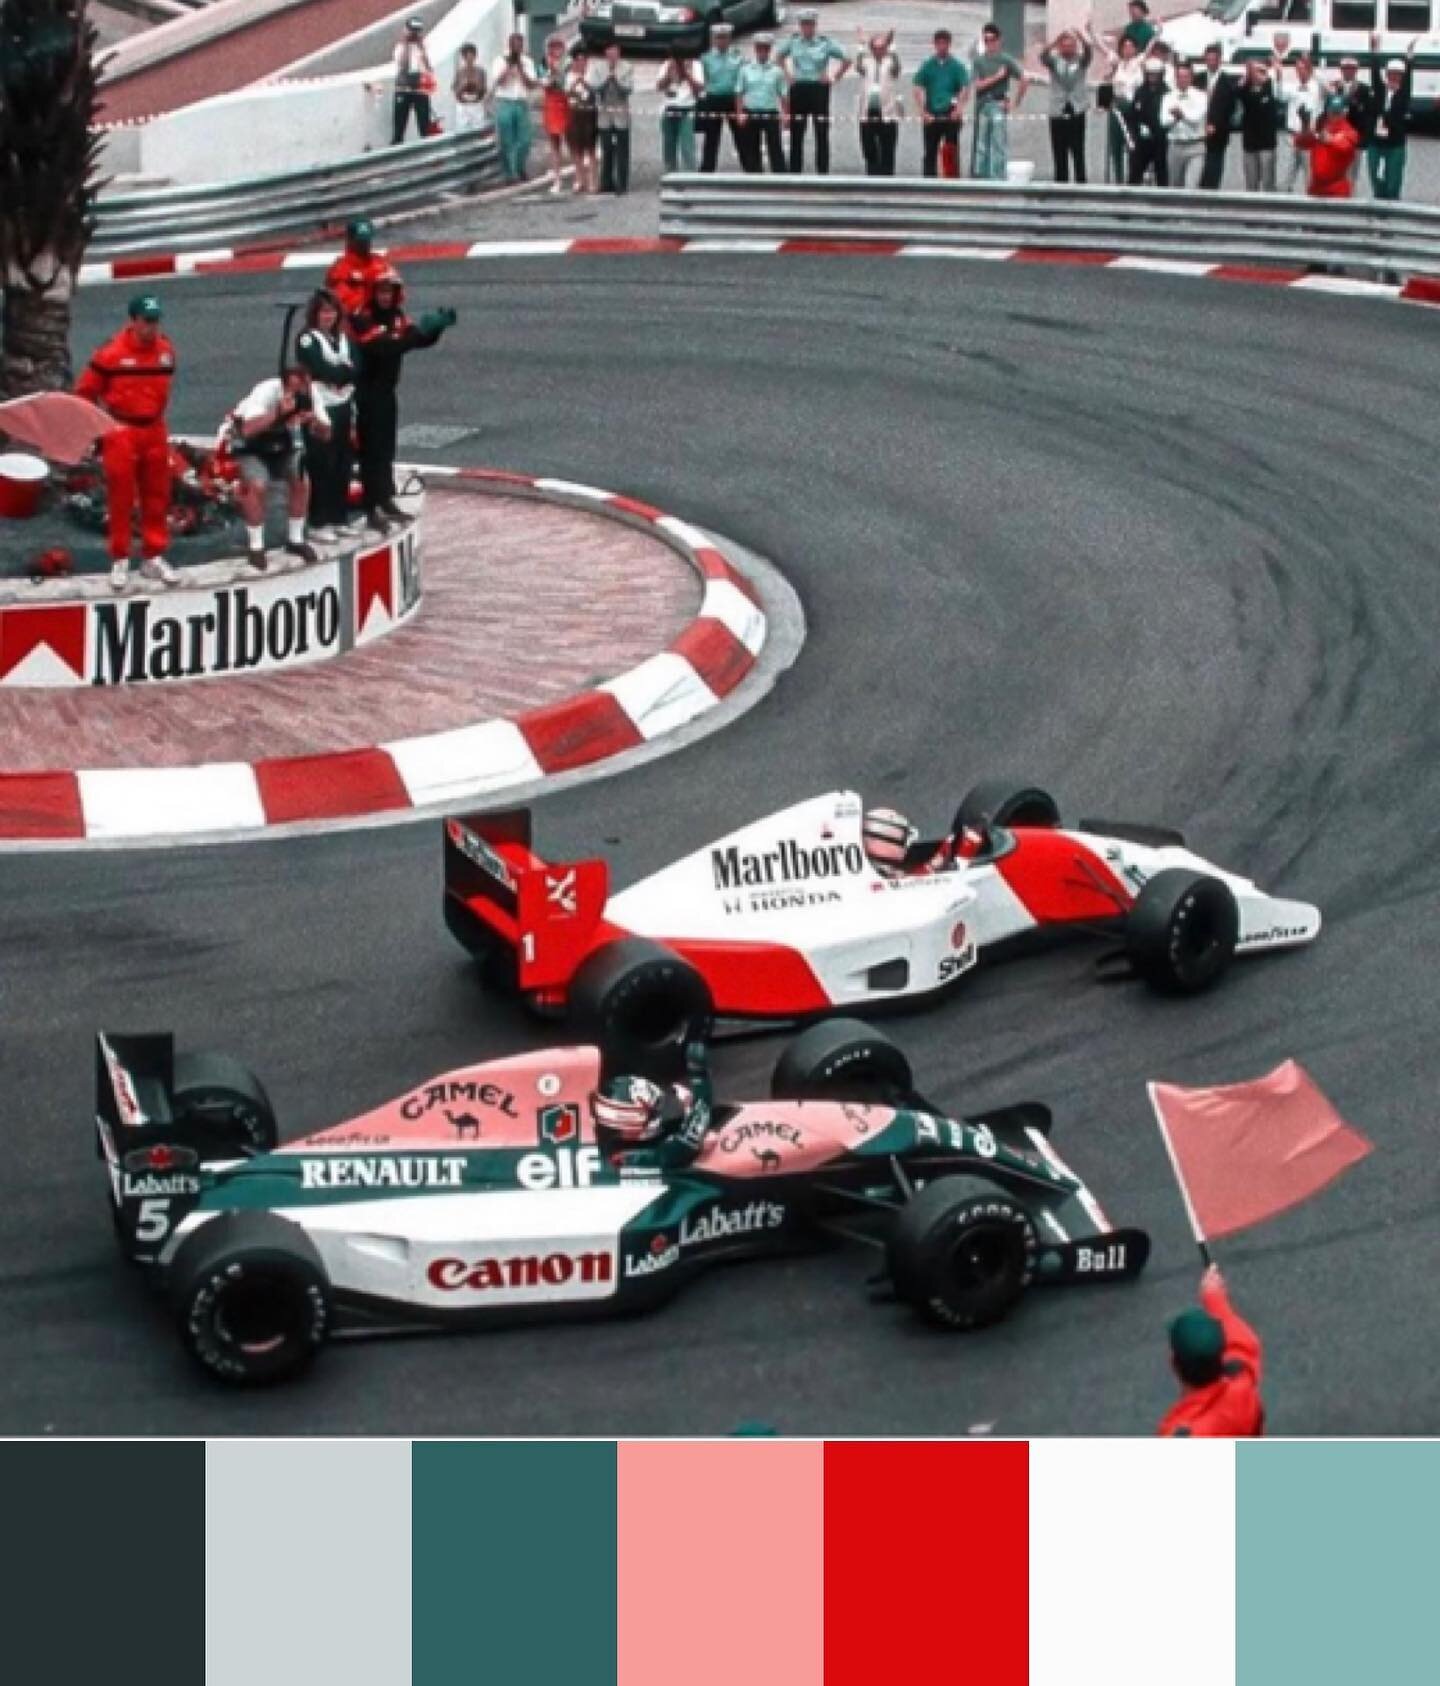 That is one delicious hairpin. .
#colorpalette  #vintageracing #vintagecolors  #artdirection  #raceday #formula1